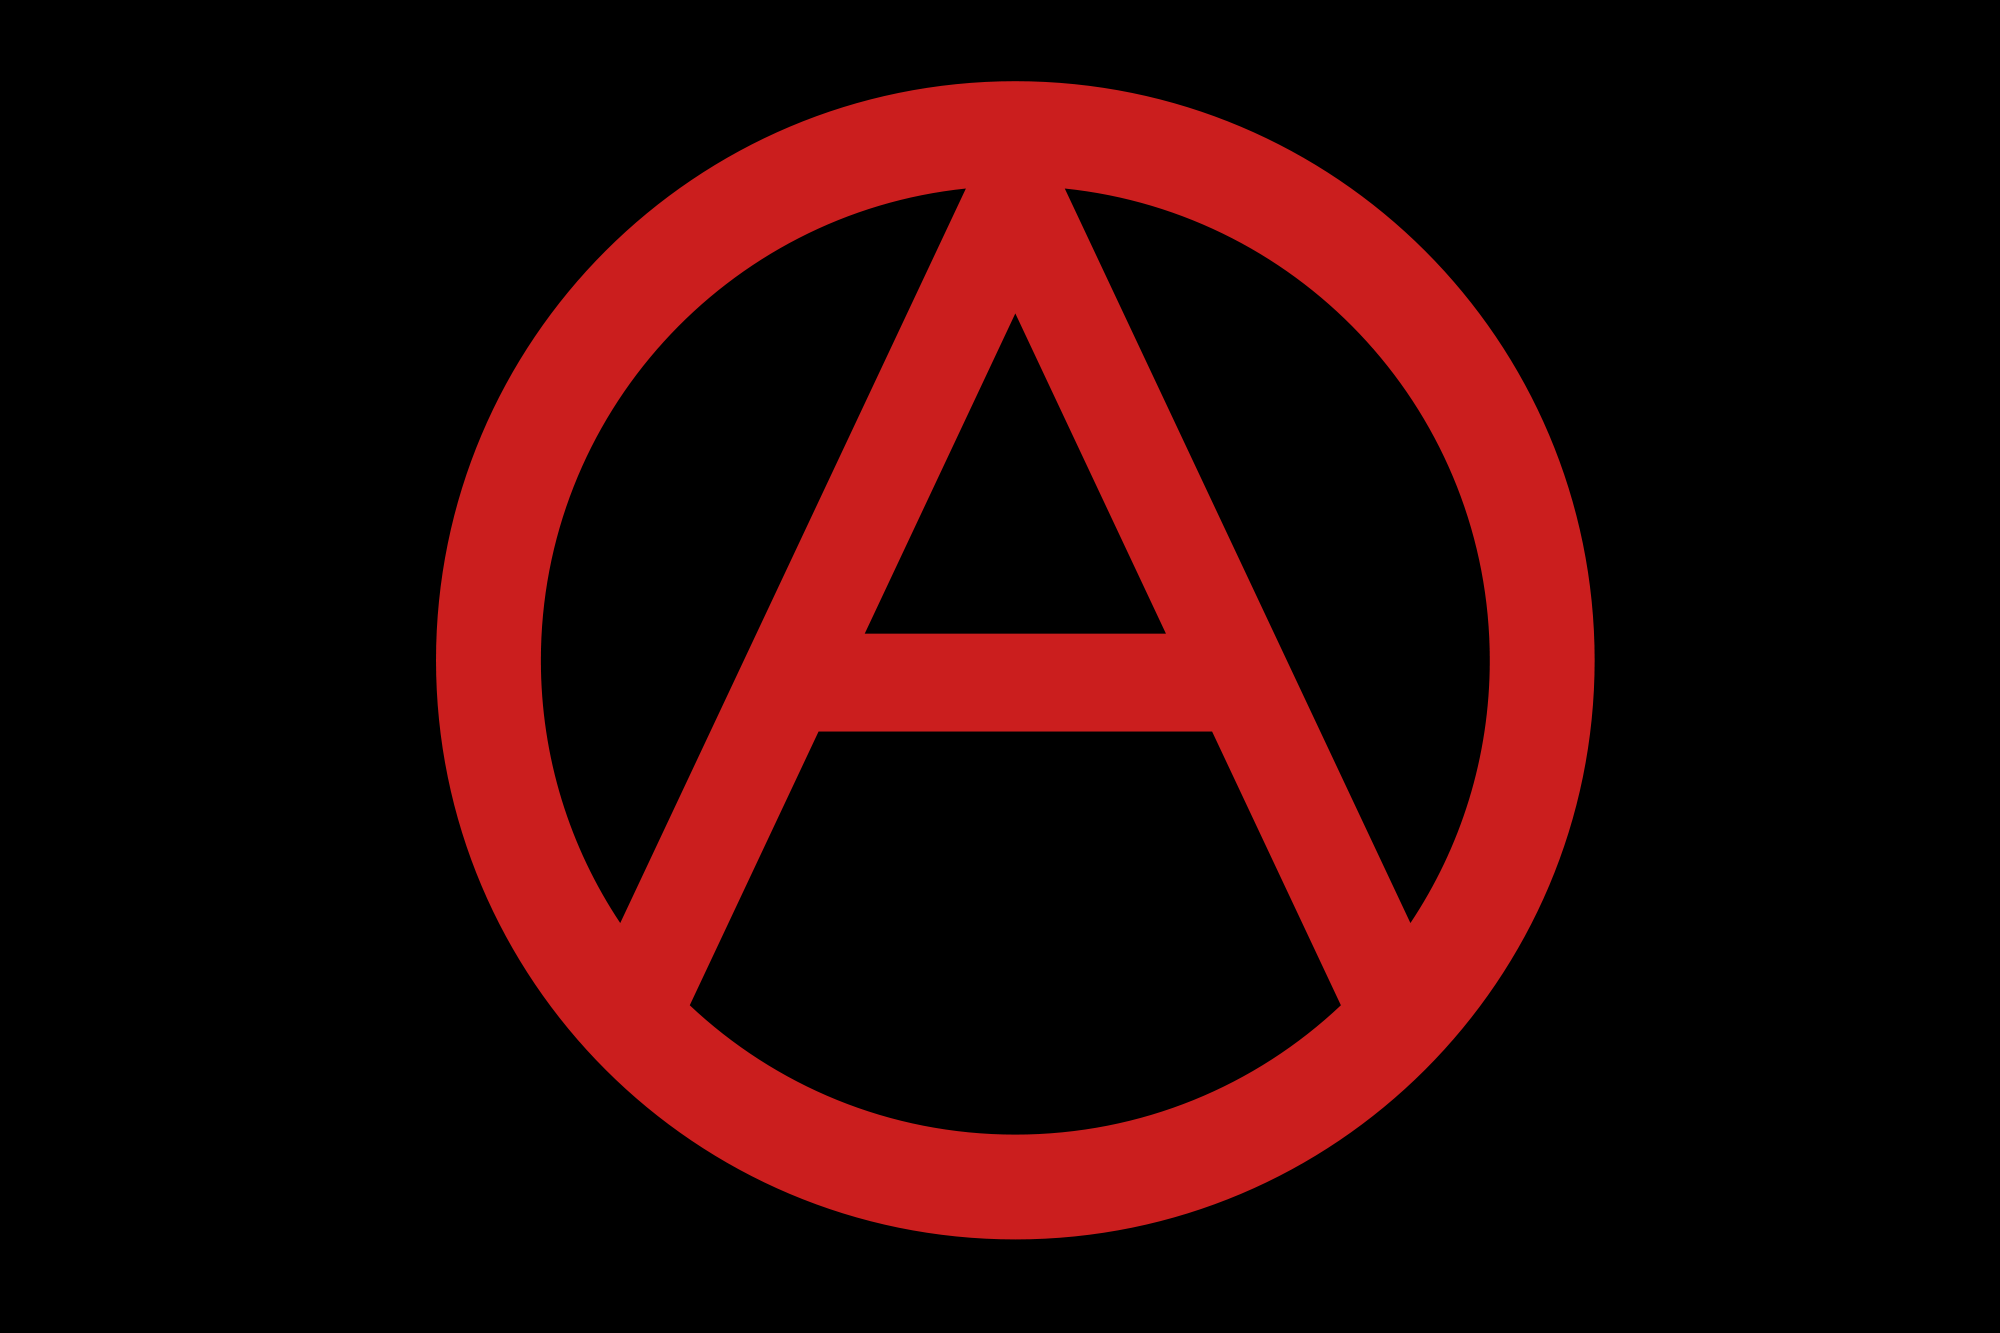 Open Pluspng Pluspng.com   Logo Anarchy Us Png - Anarchy Us, Transparent background PNG HD thumbnail